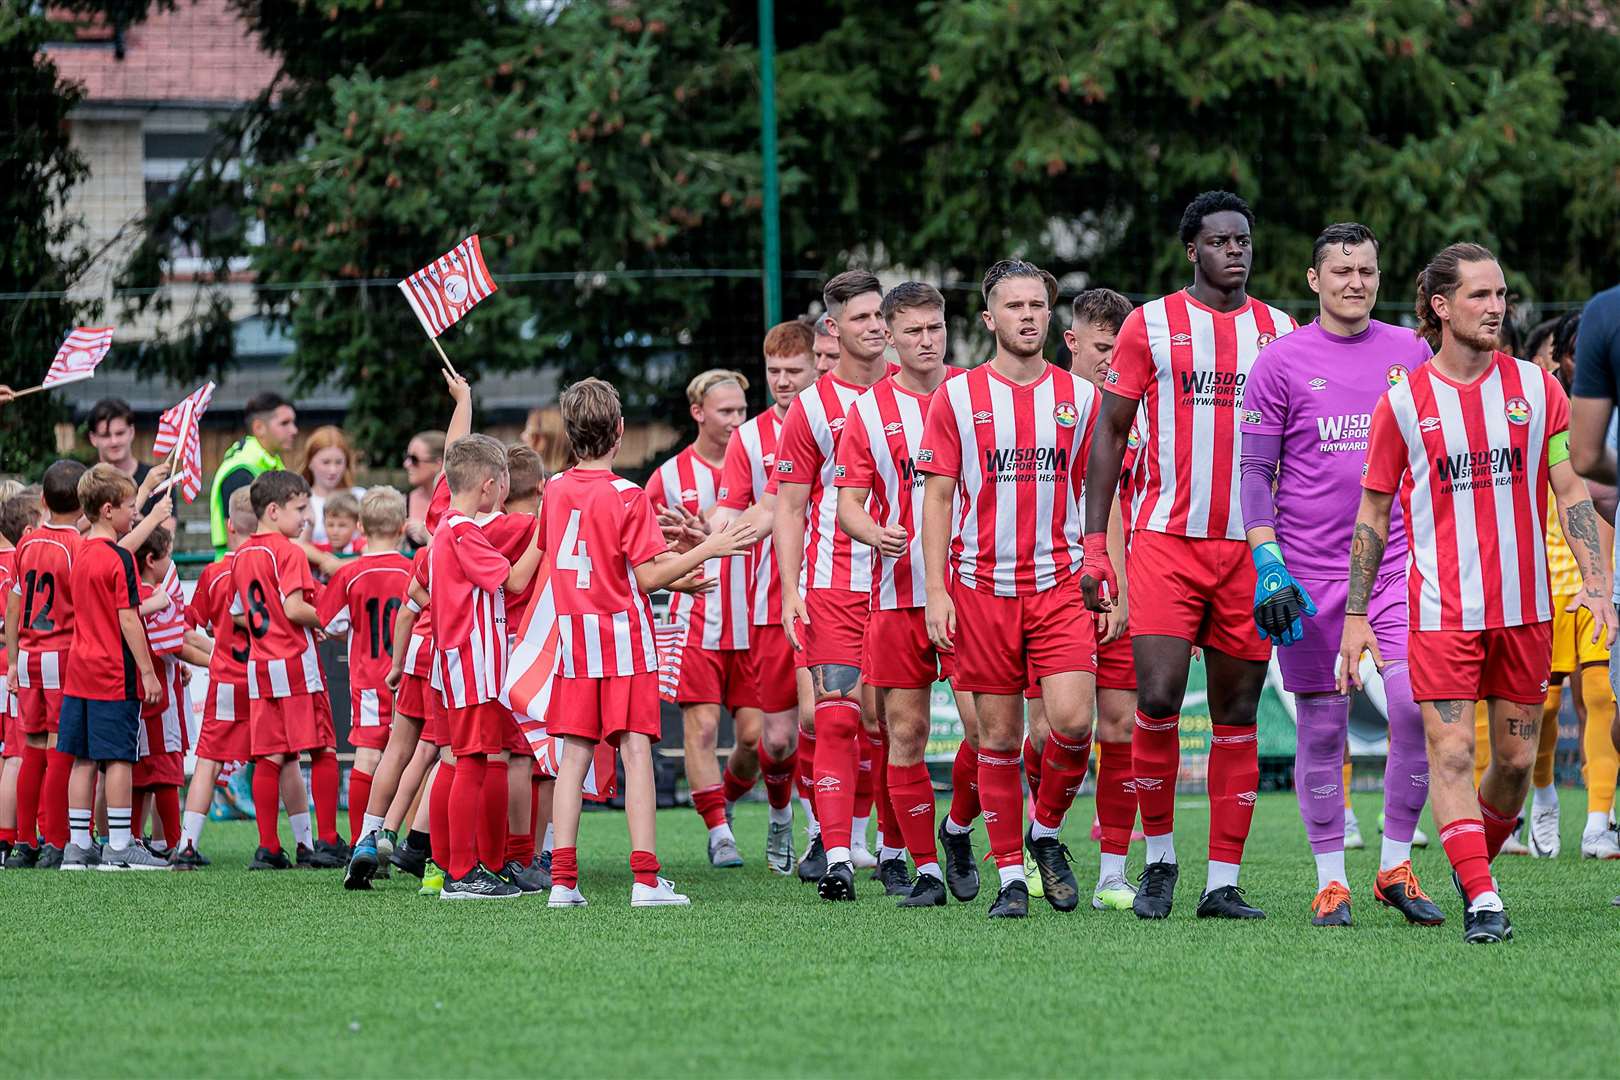 Steyning players are welcomed on to the pitch before taking on Maidstone. Picture: Helen Cooper